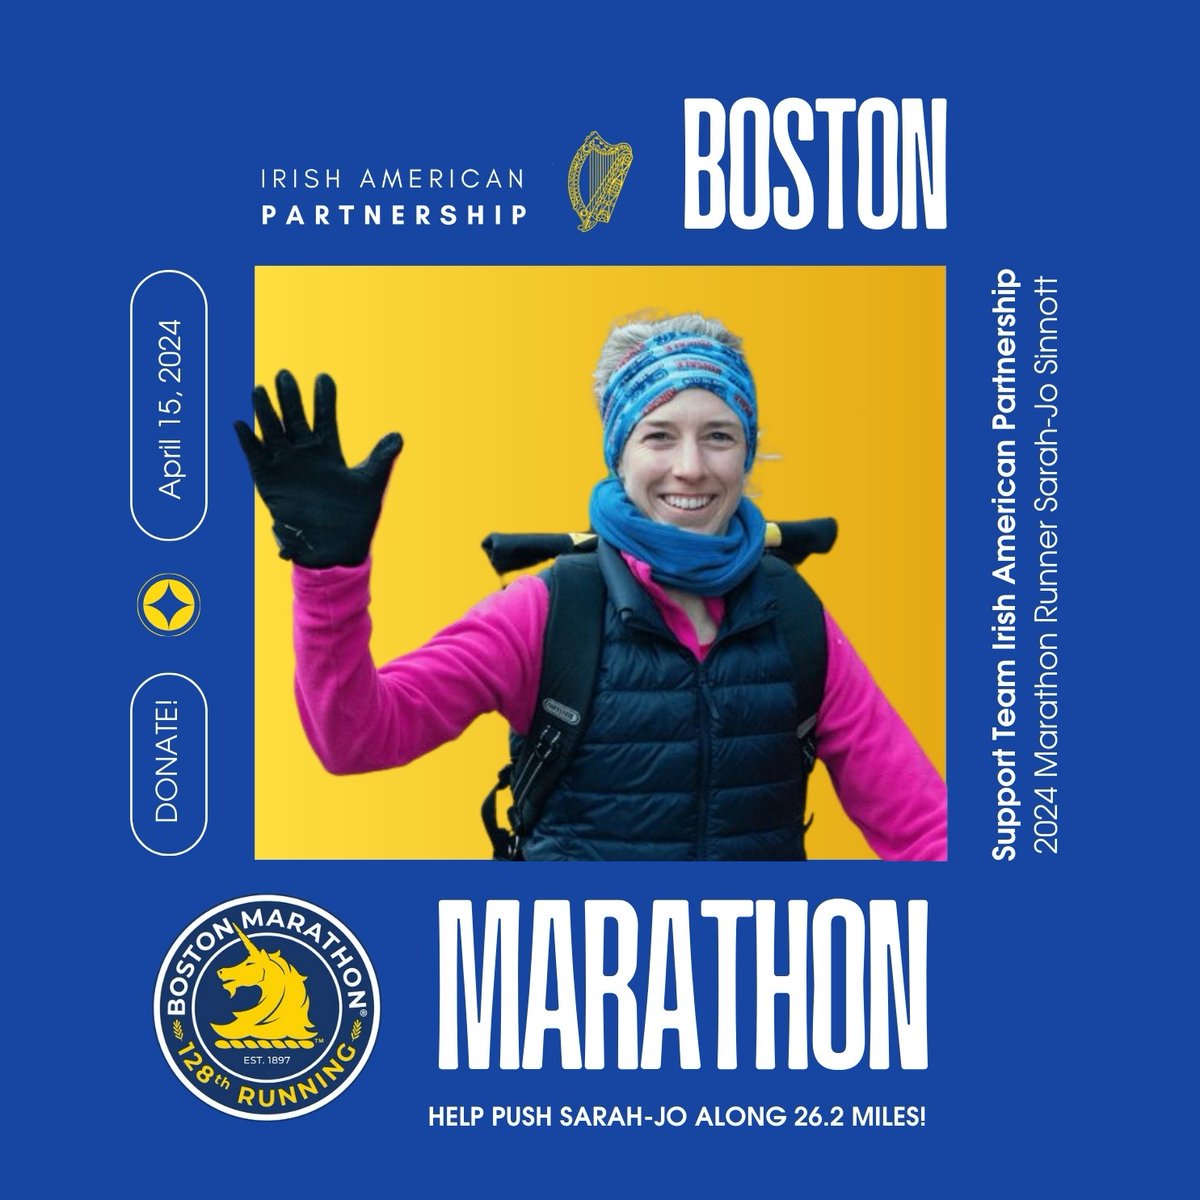 Please join us in cheering on @SarahJoSinnott as part of Team @Irishaporg in the @BAA 128th #BostonMarathon® on April 15 - presented by @BankofAmerica. Help push Sarah-Jo along 26.2 miles by supporting schools across the island of Ireland! Donate here: bit.ly/4cFPMON